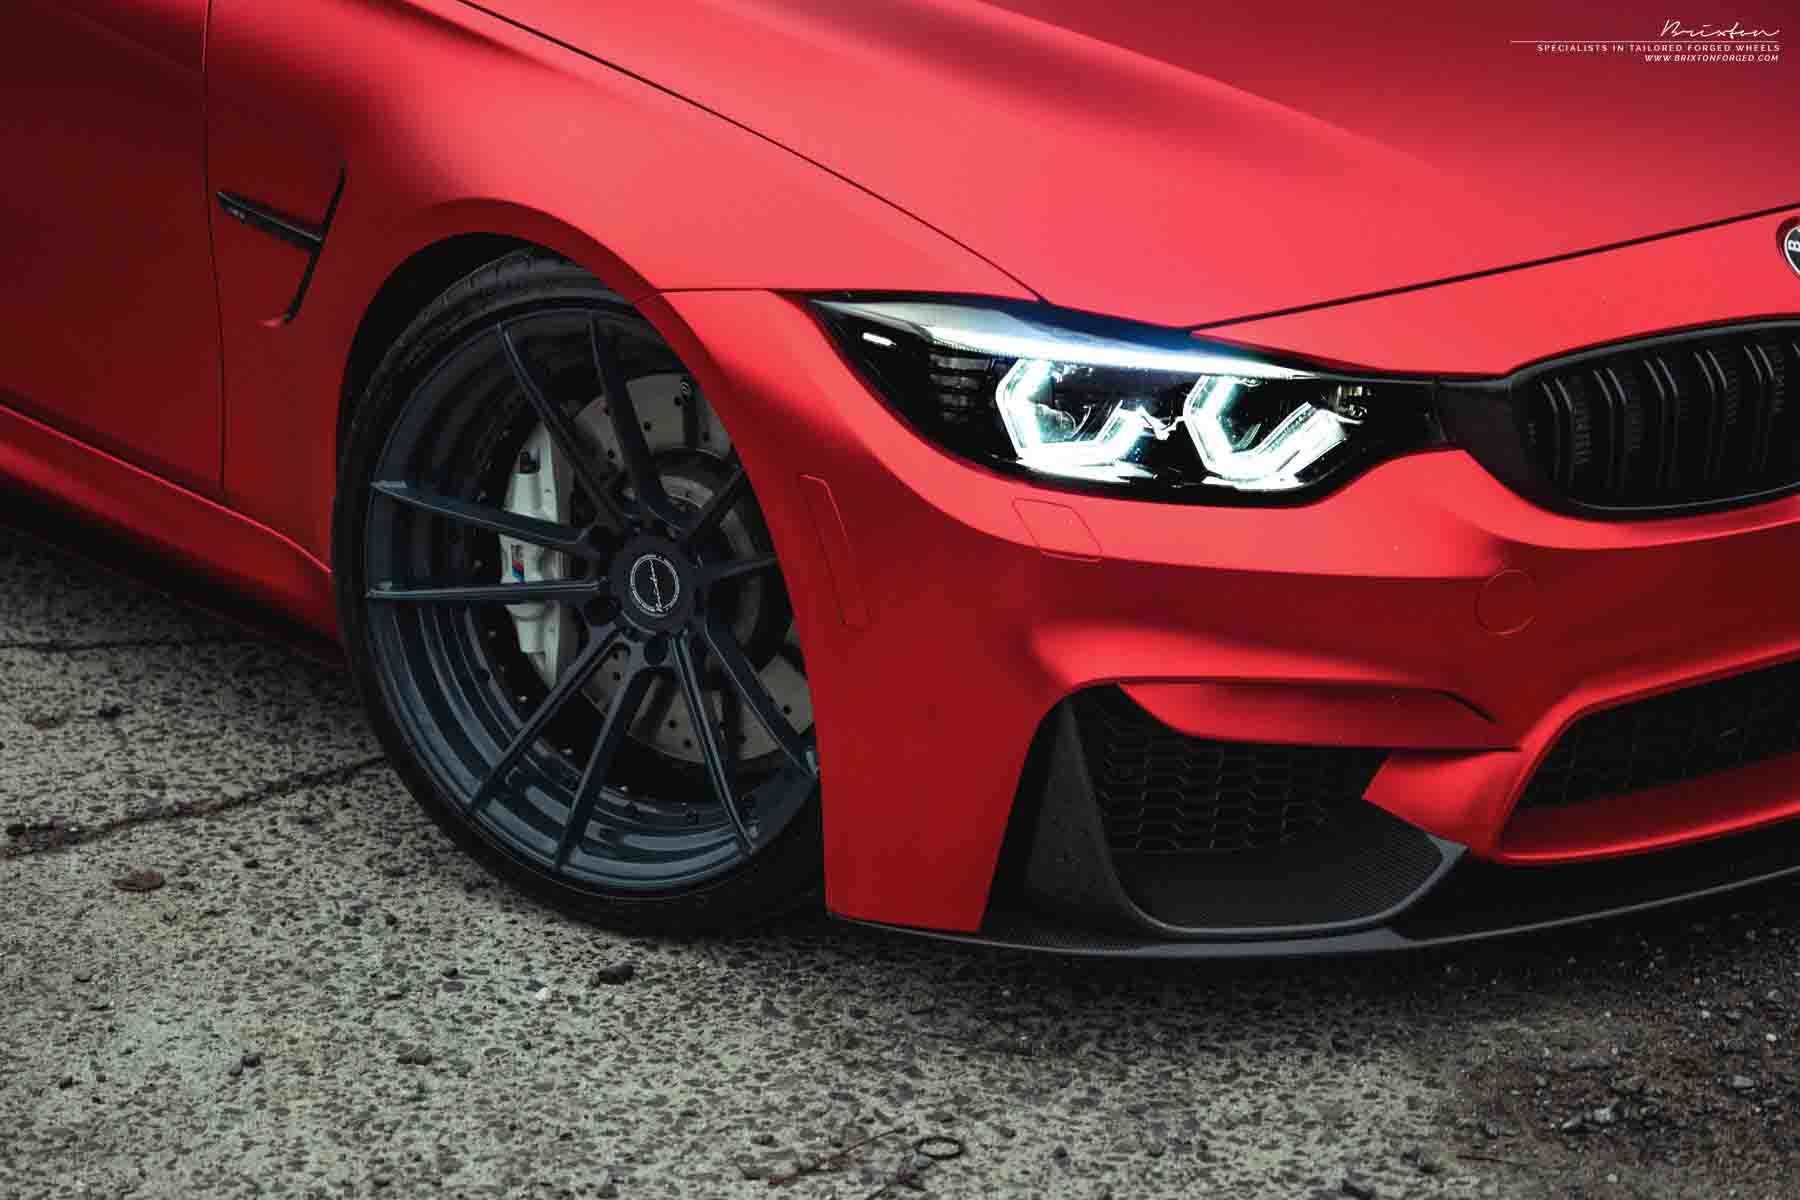 images-products-1-2183-232974471-brixton-forged-wheels-matte-red-frozen-red-bmw-f80-m3-brixton-forged-m51-duo-series-forged-wheel.jpg